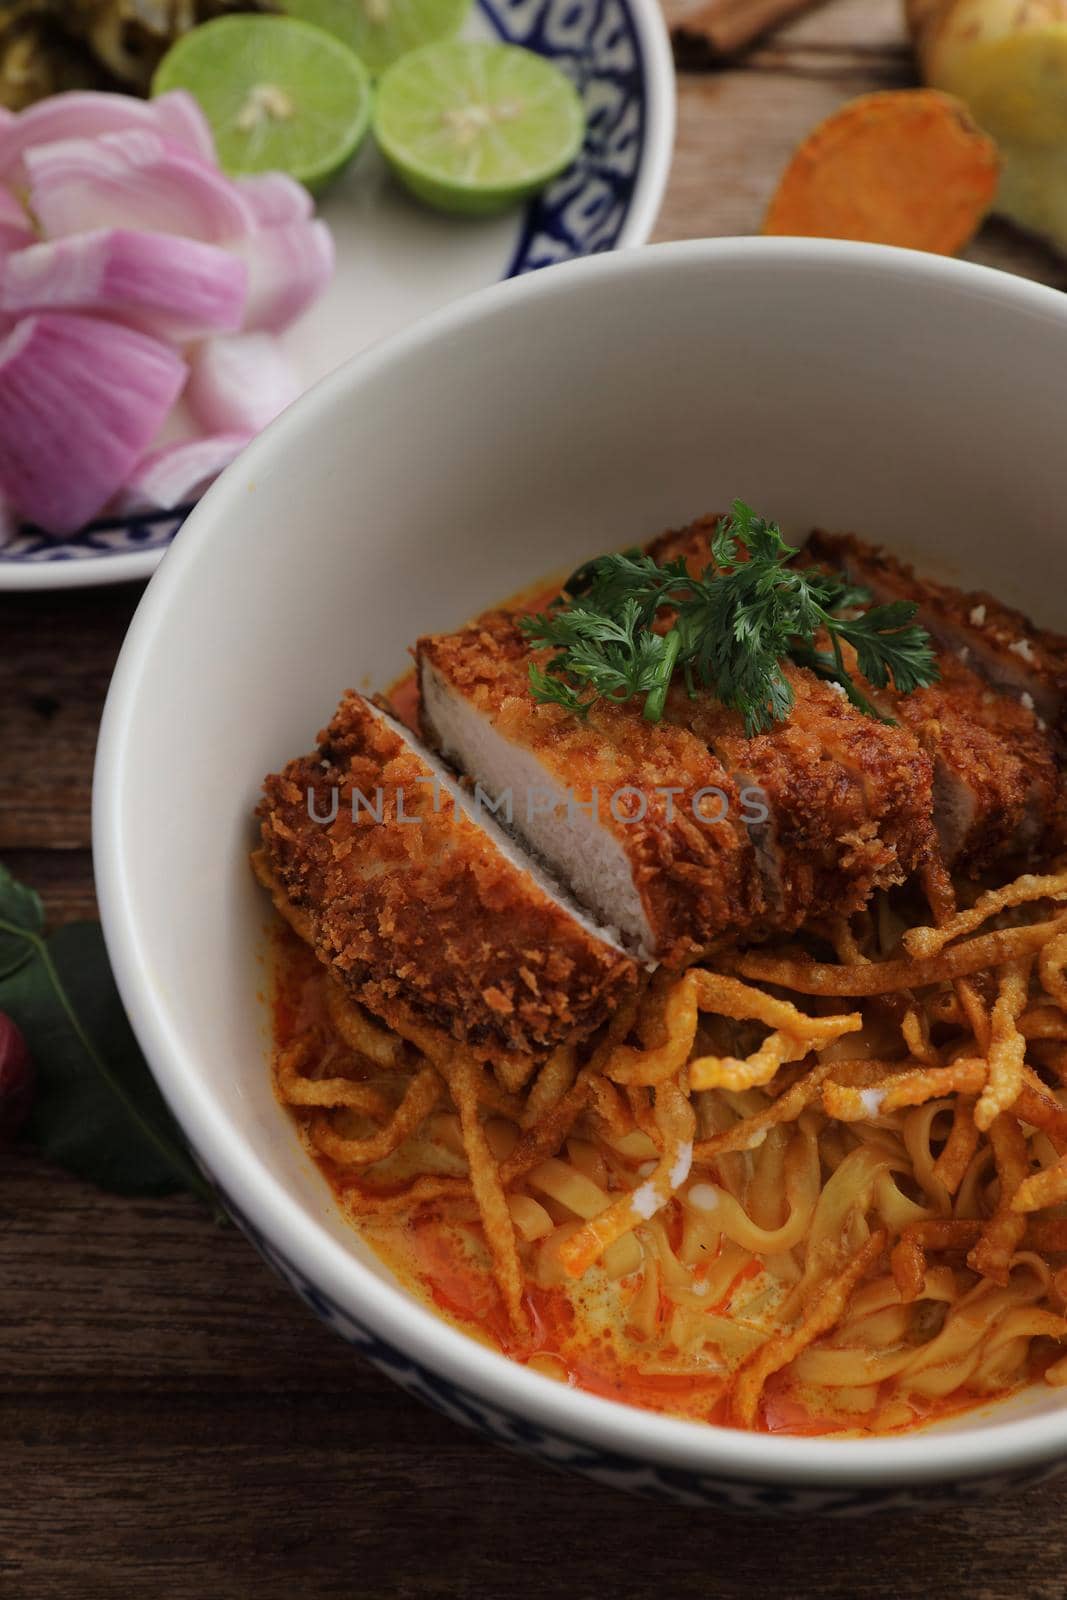 Local northern Thai food Egg noodle curry with fried pork on wood background by piyato